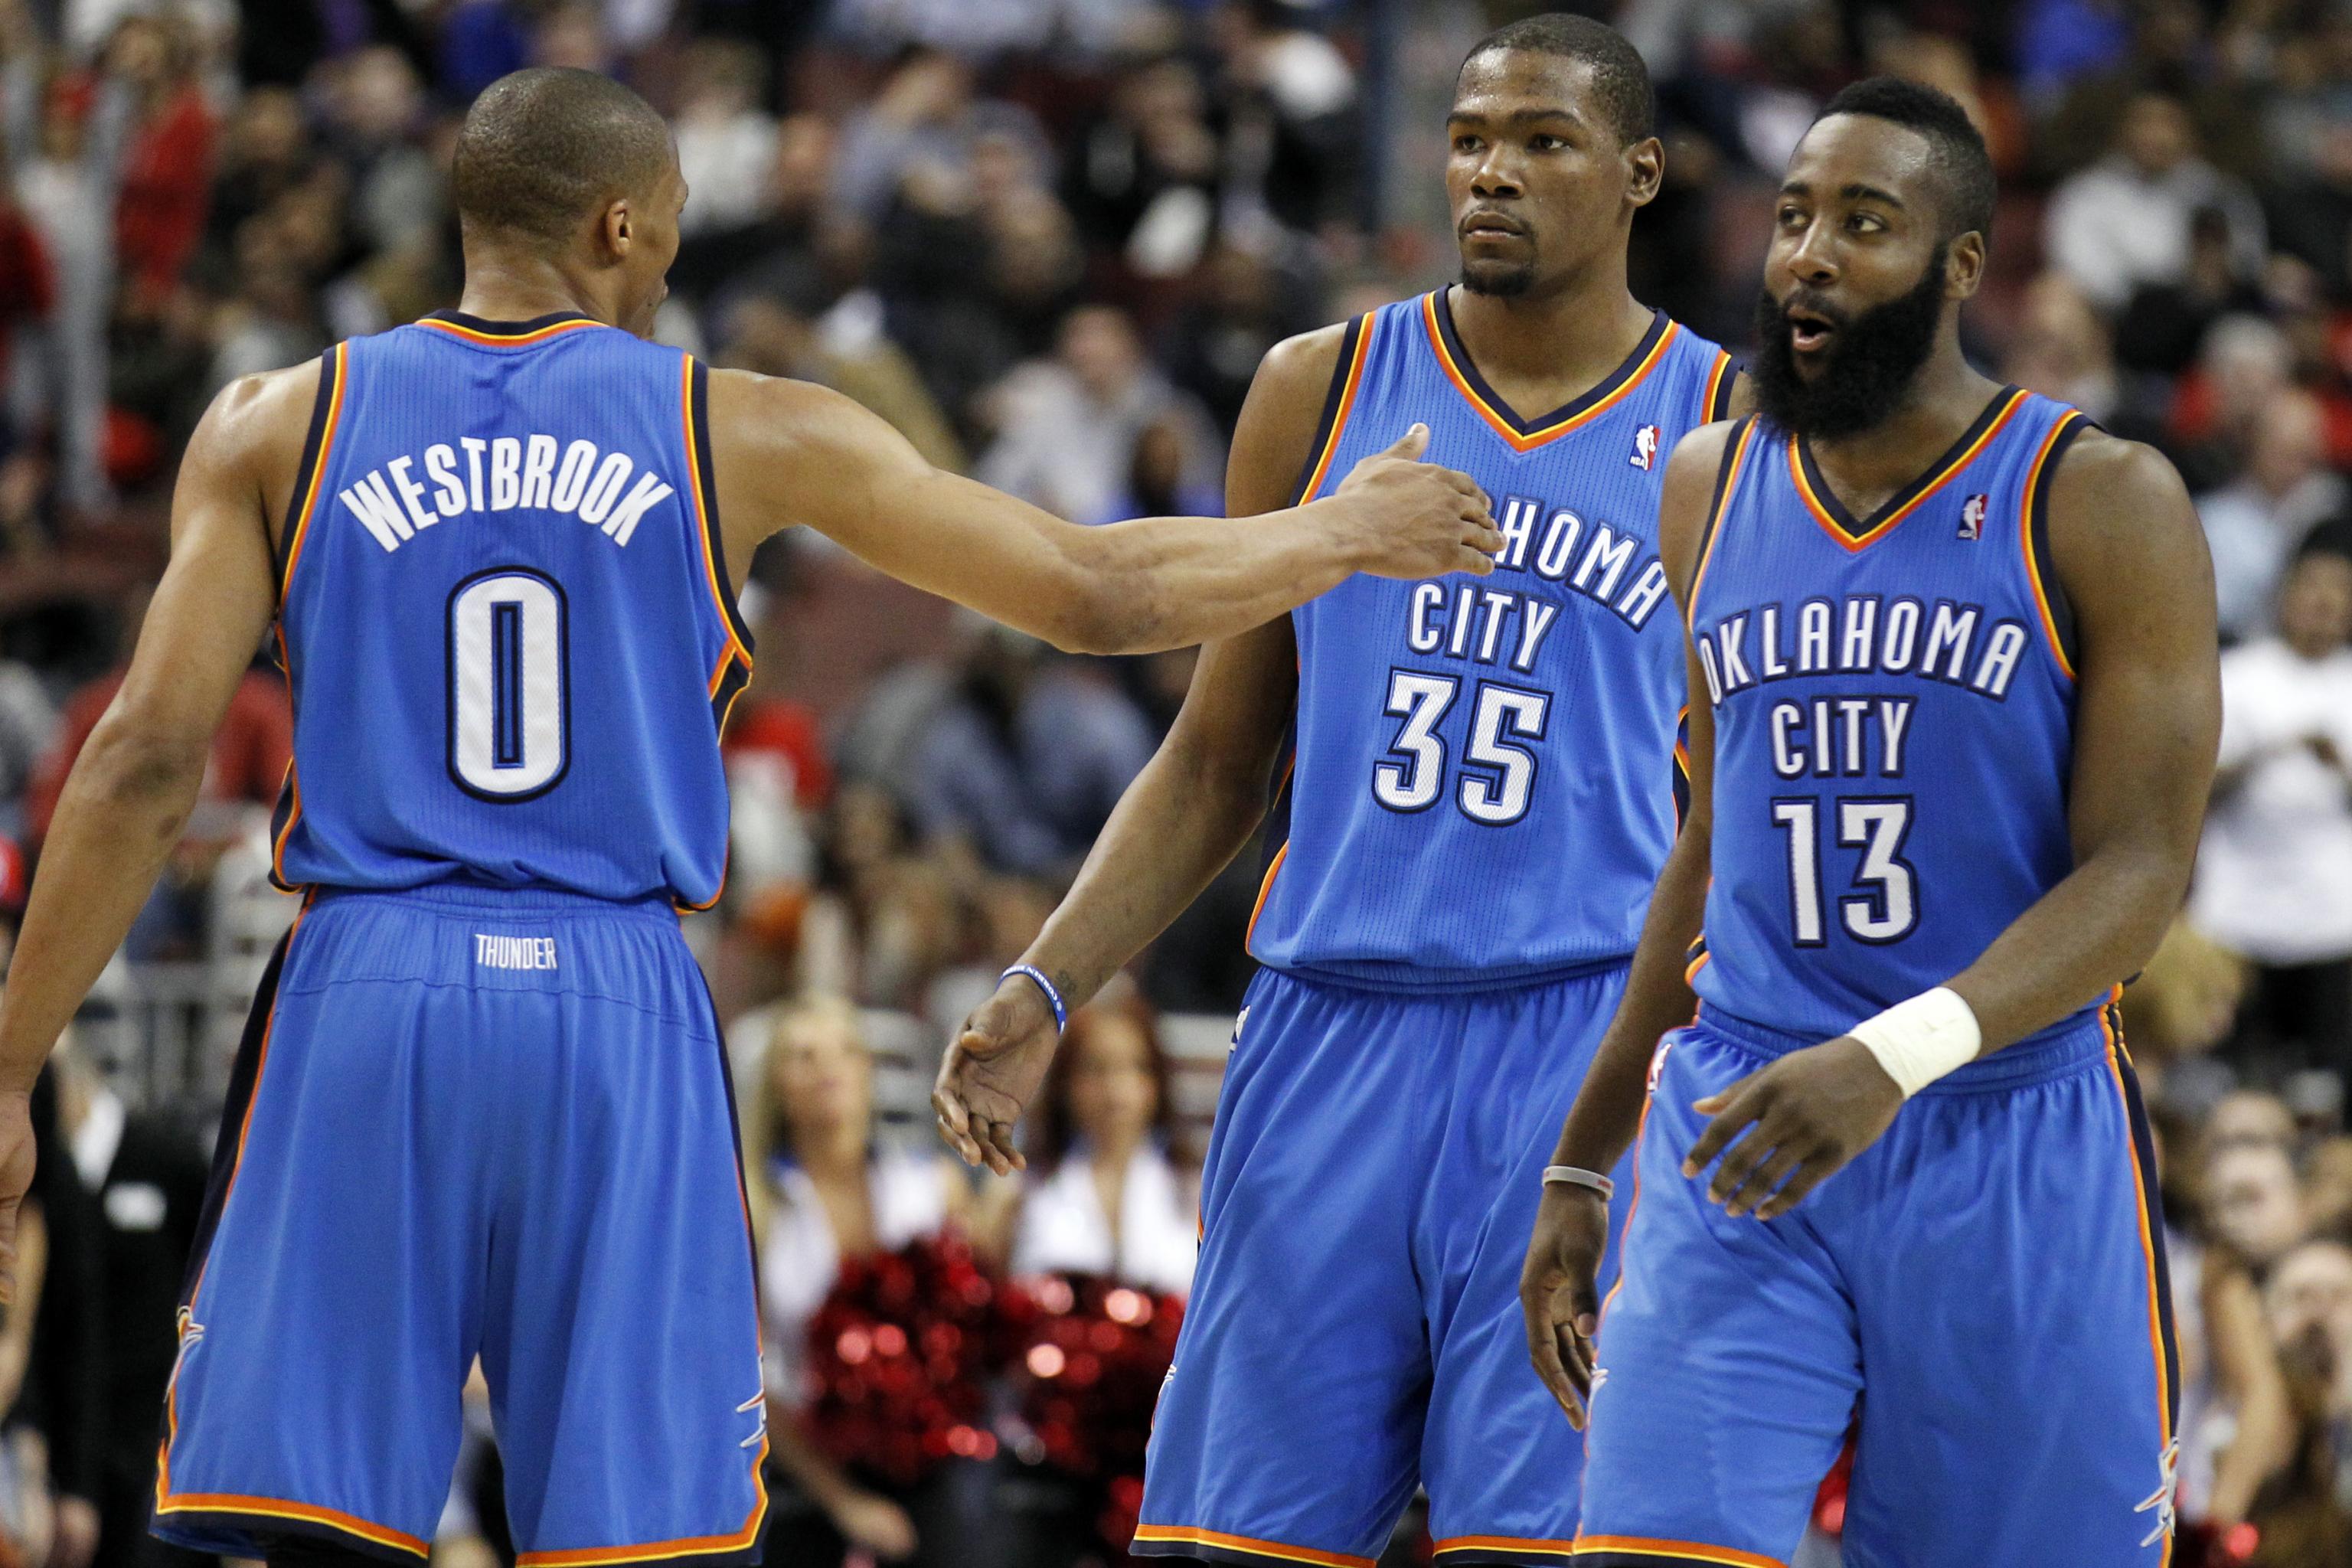 How many future MVPs does OKC Thunder have on its current roster